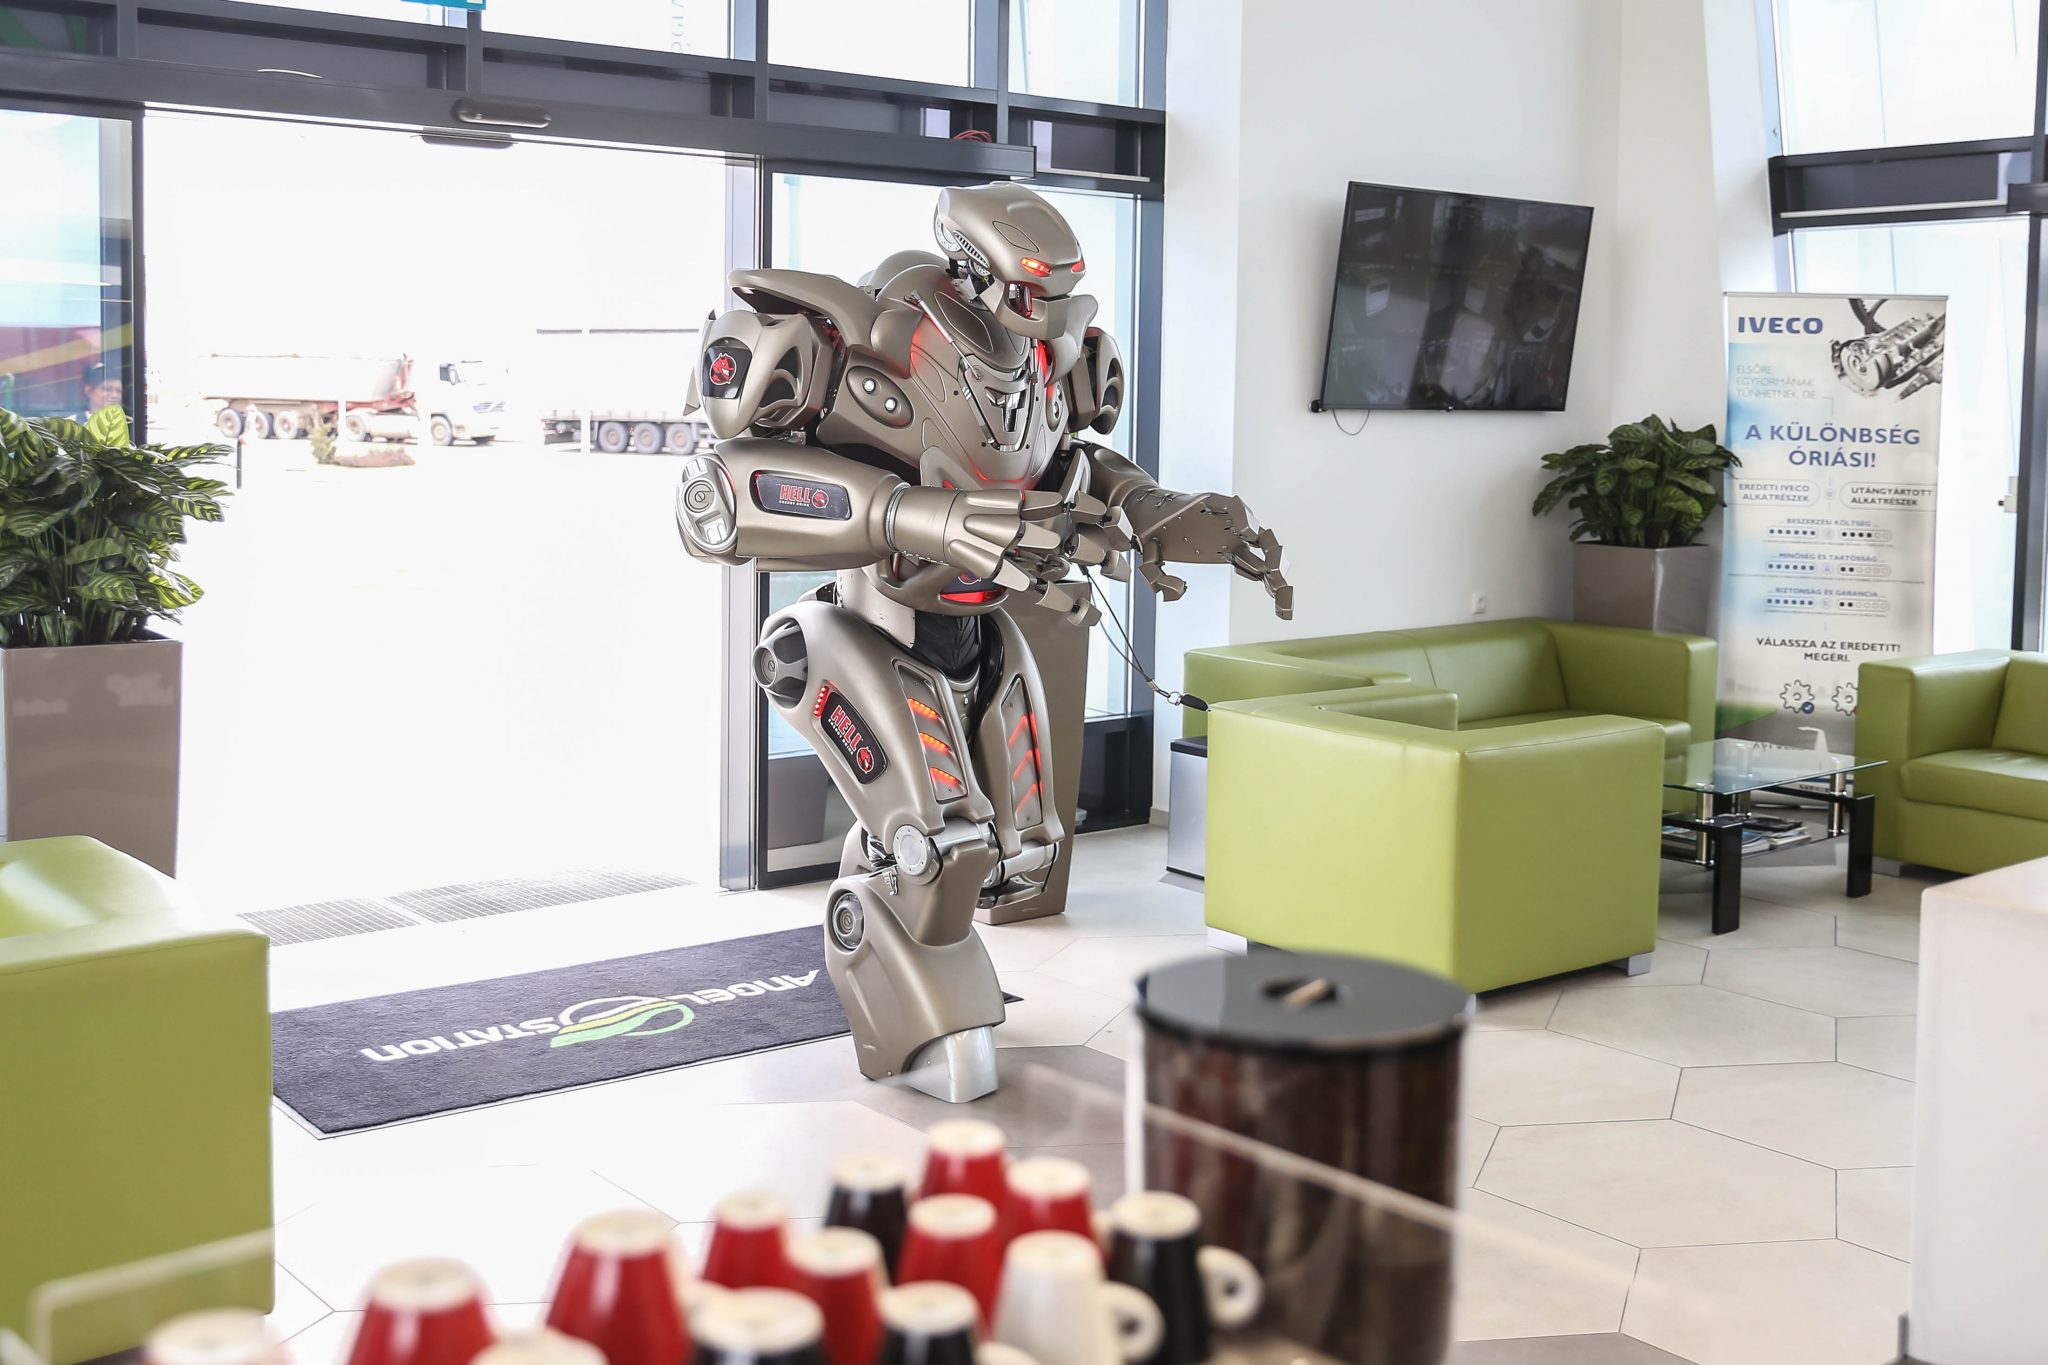 Titan the Robot stops for refreshments at a service station in Hungary.